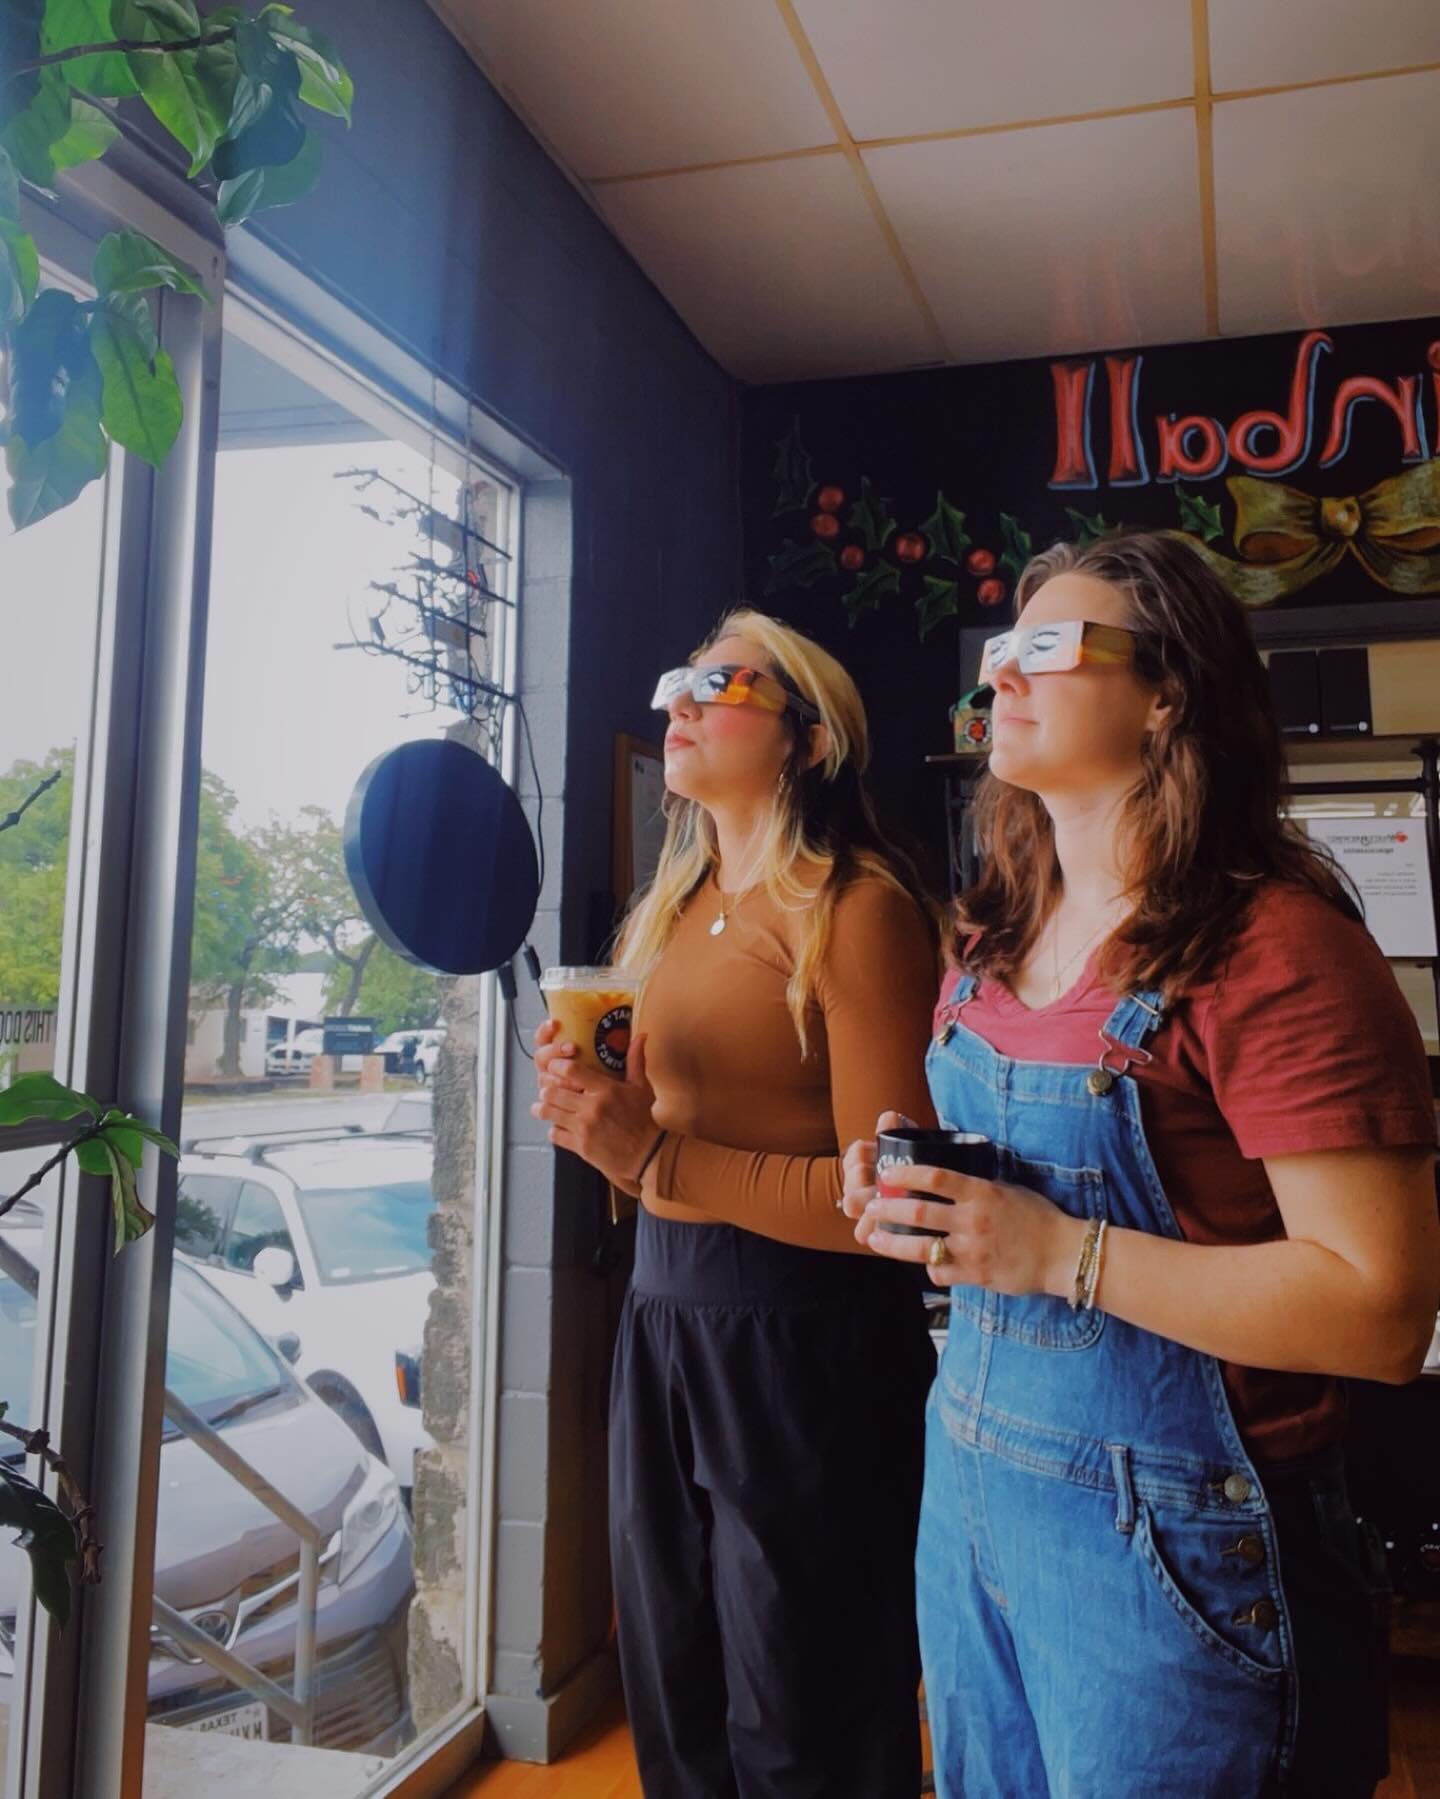 Until supplies last, every drink purchased will get a pair of glasses!! 👓🦦🌑

Grab your buddies and hang out with us for the eclipse! ✨🌘🌑🌒✨

ALSO DON&rsquo;T FORGET! We have our seasonal banana nut cold brew out! It&rsquo;s becoming a fan fav!! 